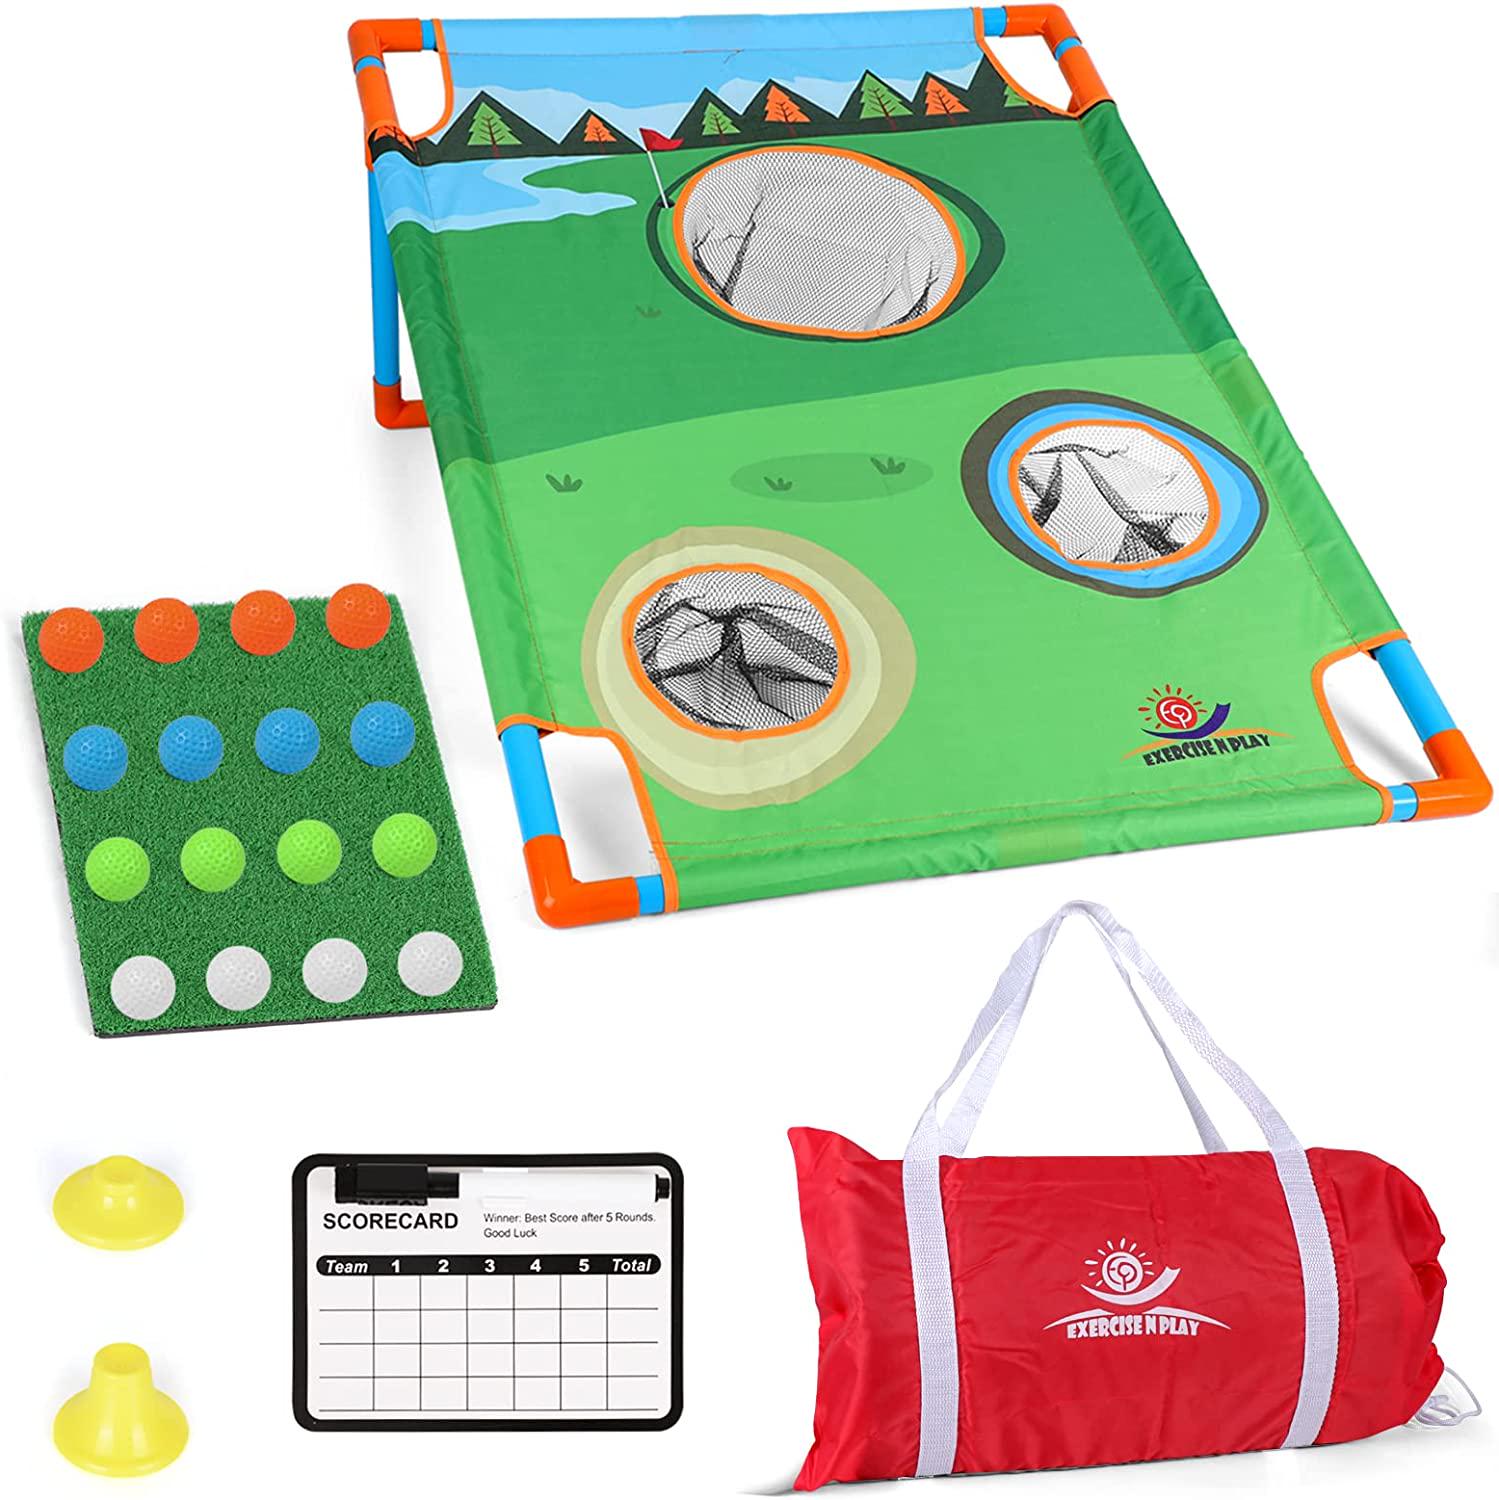 EP EXERCISE N PLAY, EP EXERCISE N PLAY Backyard Golf Cornhole Game Kit, Golf Practice Chipping Game with Chipping Target, 16 Balls, Hitting Mat, 2 Tees, Scoreboard, Carry Bag Best Outdoor Golf Gift for Adult and Kids